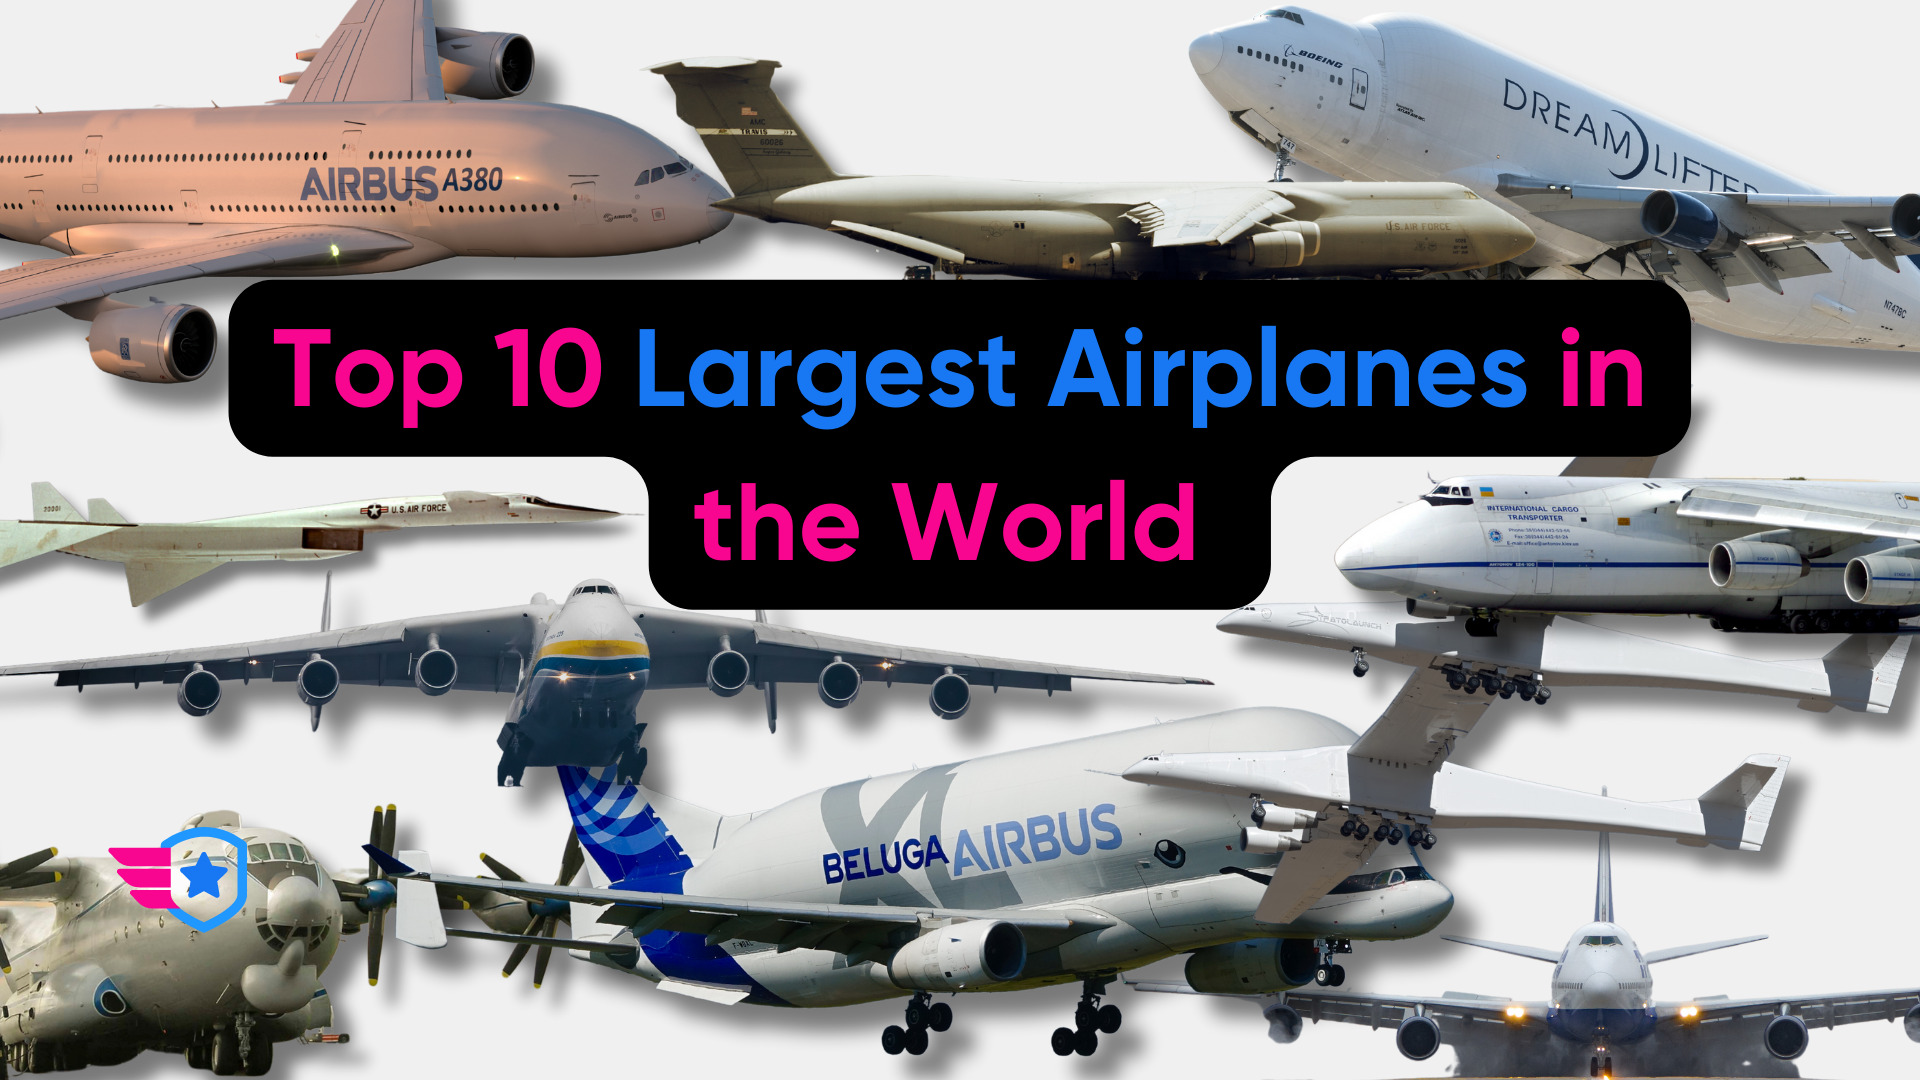 Top 10 Largest Airplanes in the World